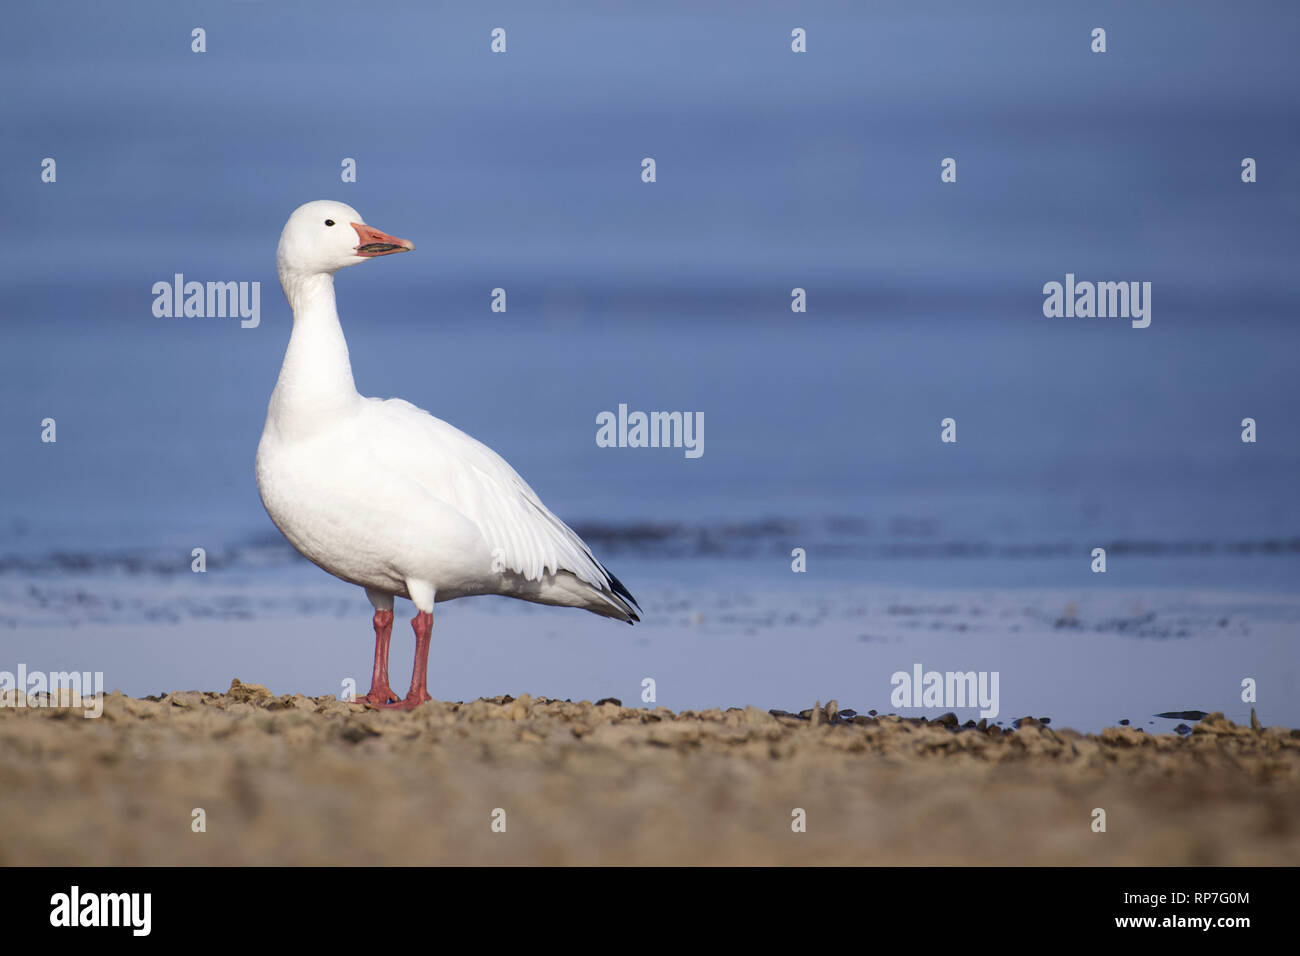 Snow Goose posing majestically on the shore of an ice covered frozen lake in winter Stock Photo